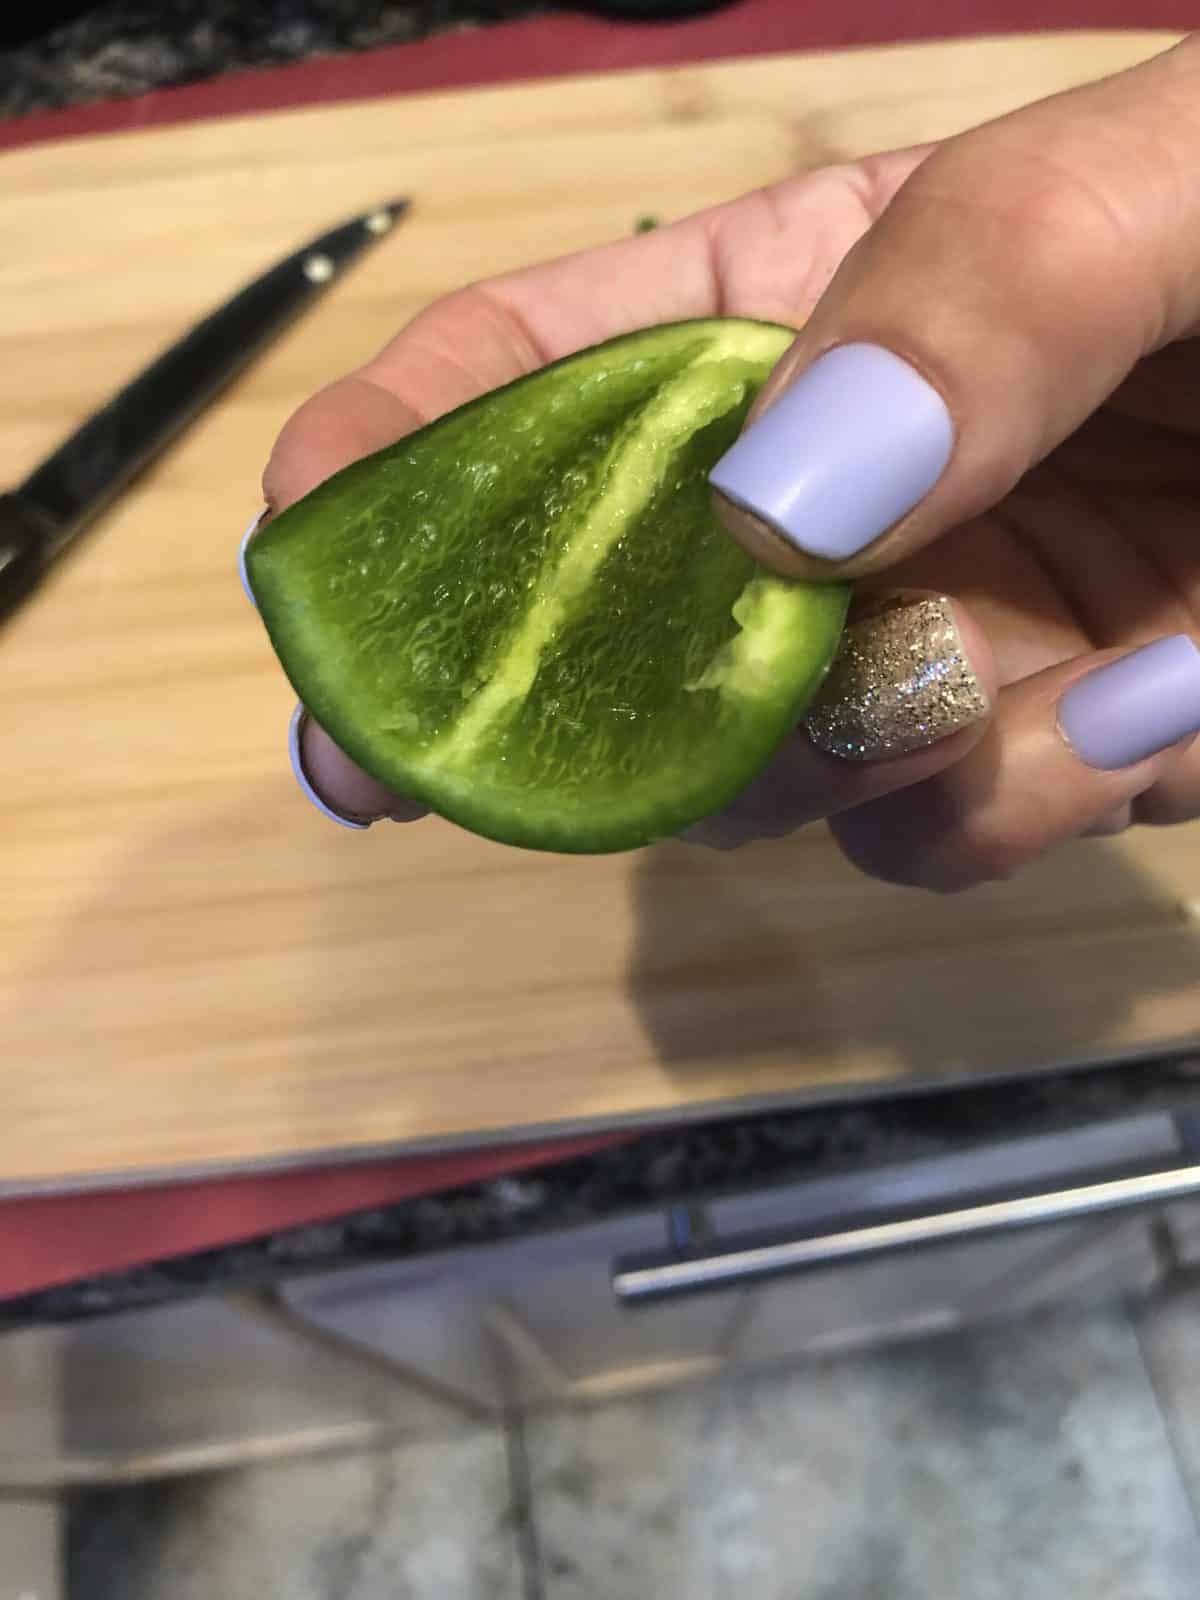 A hollowed out slice of a Jalapeno being held by a hand with purple nail polish over a wooden cutting board with a knife on the side